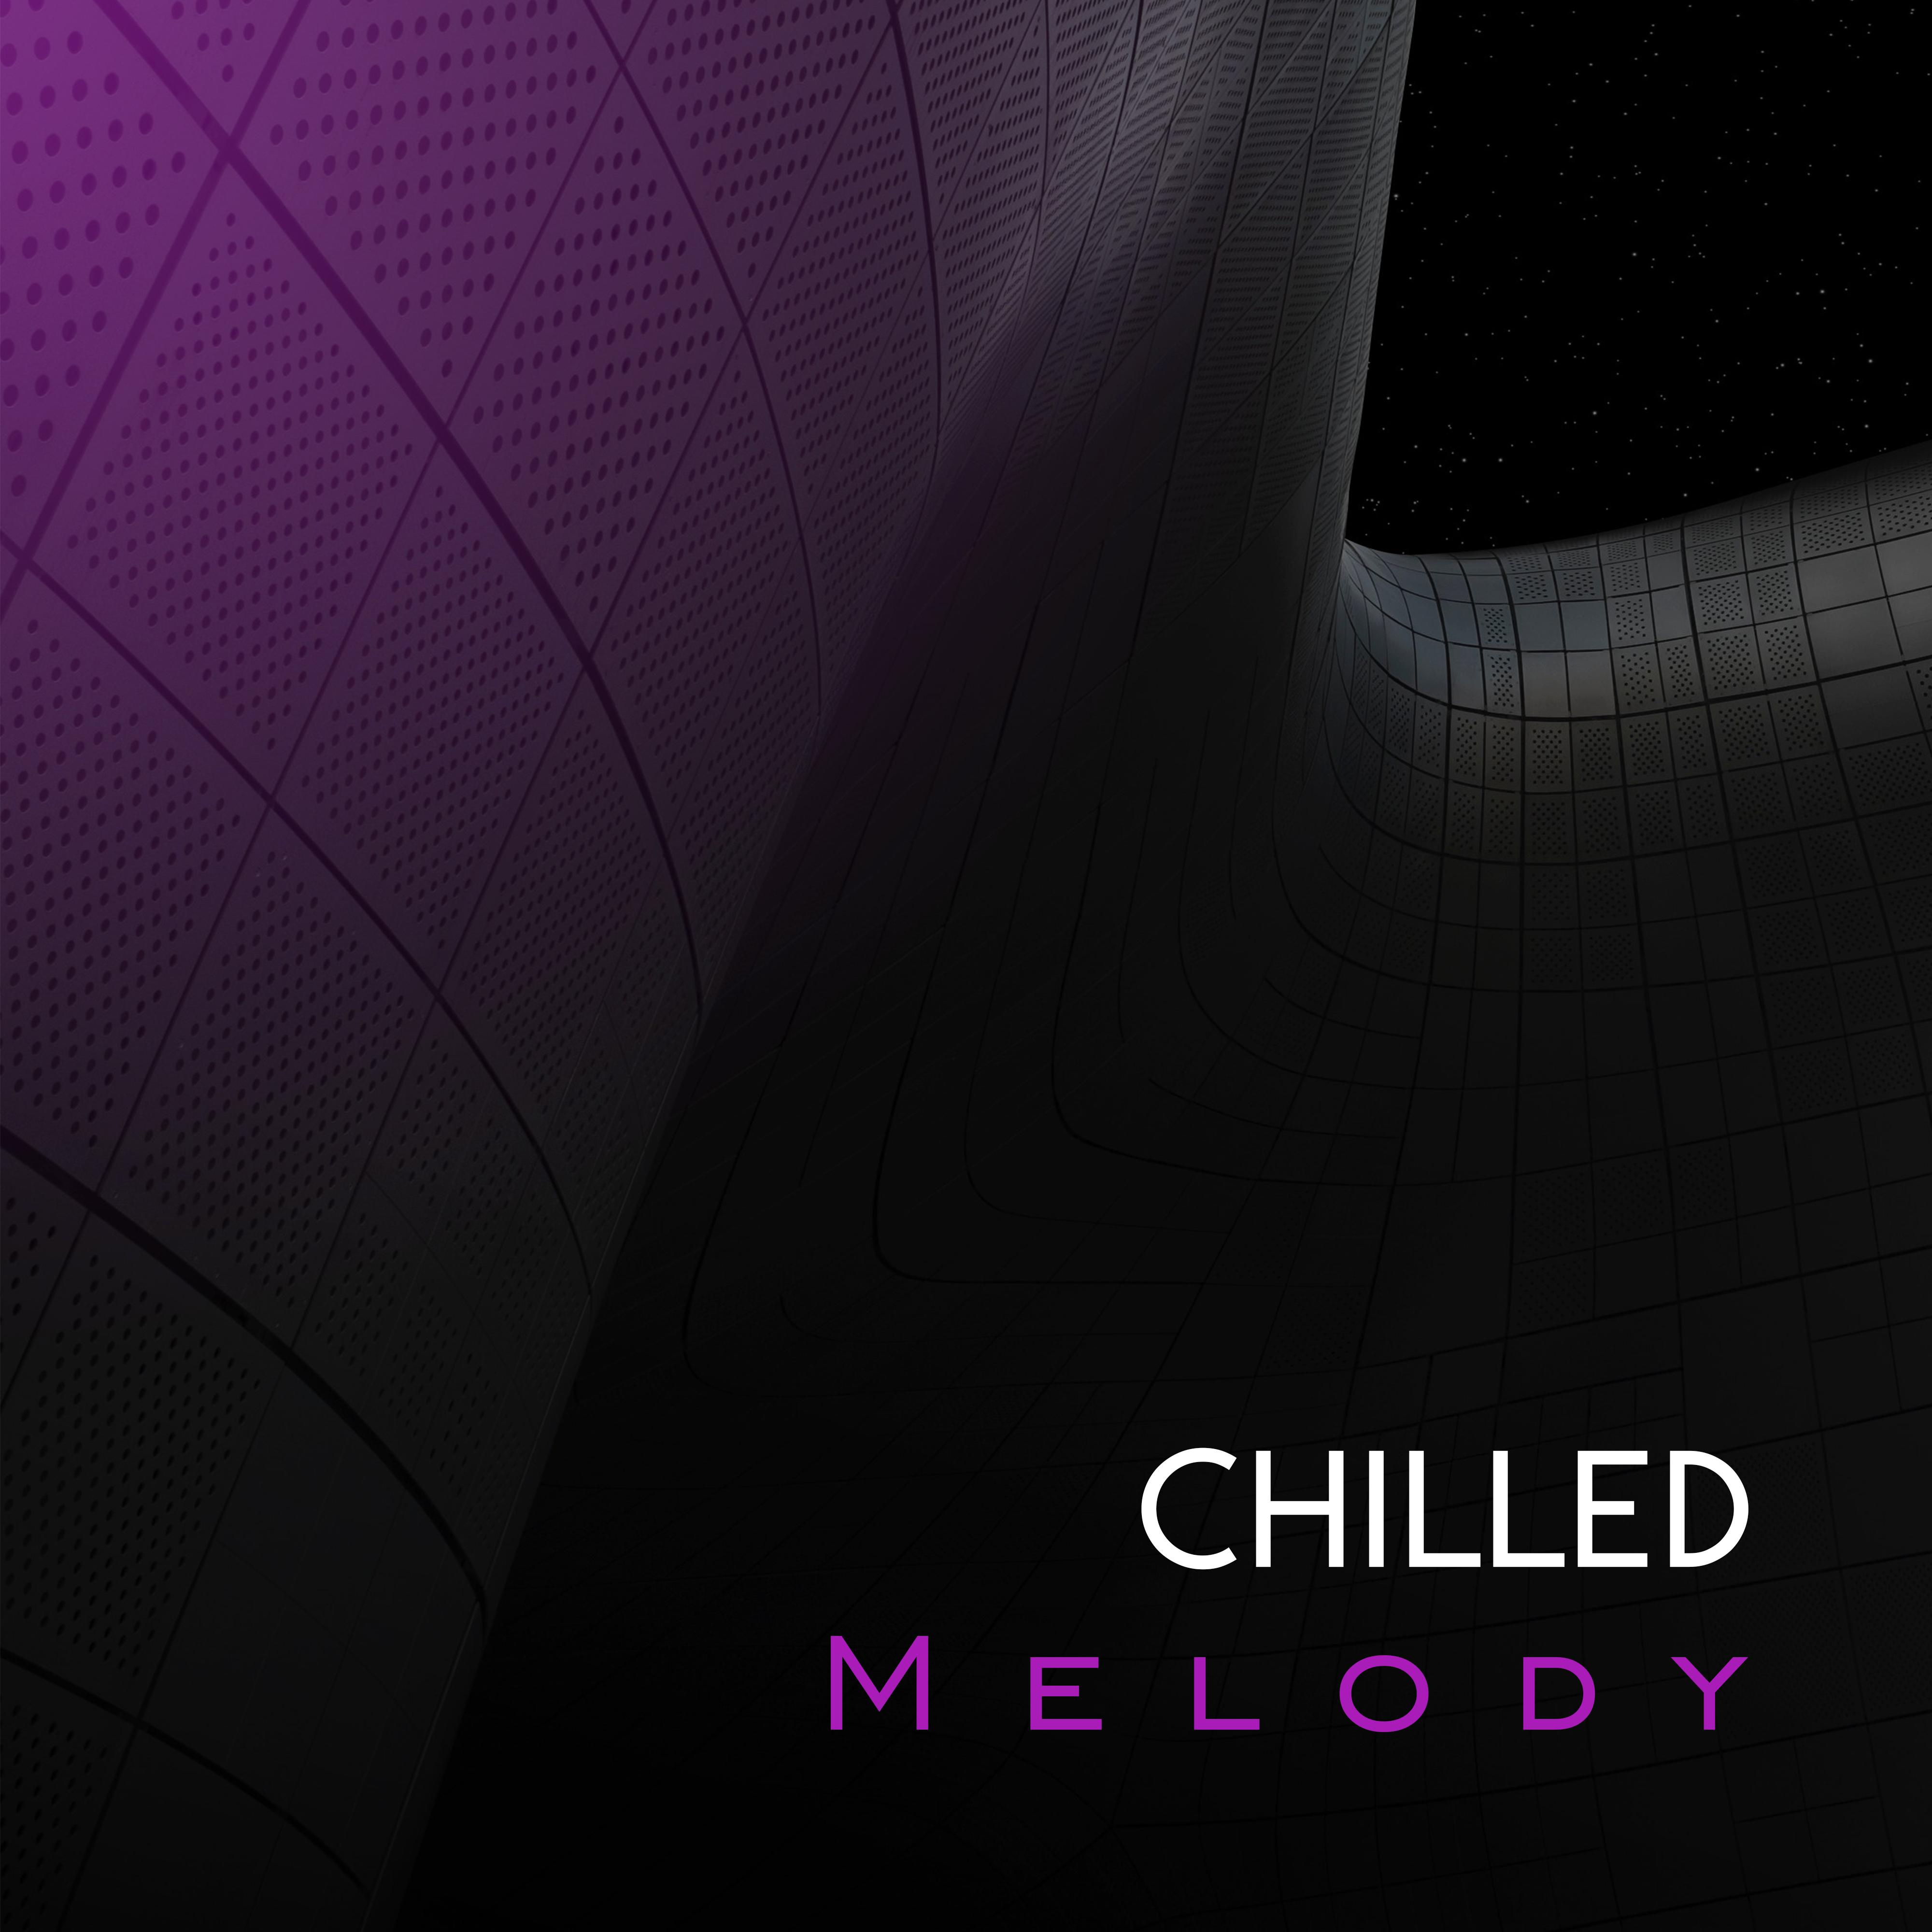 Chilled Melody  Jazz Vibes, Instrumental Jazz to Relax, Soothing Sounds, Smooth Jazz Reduces Stress